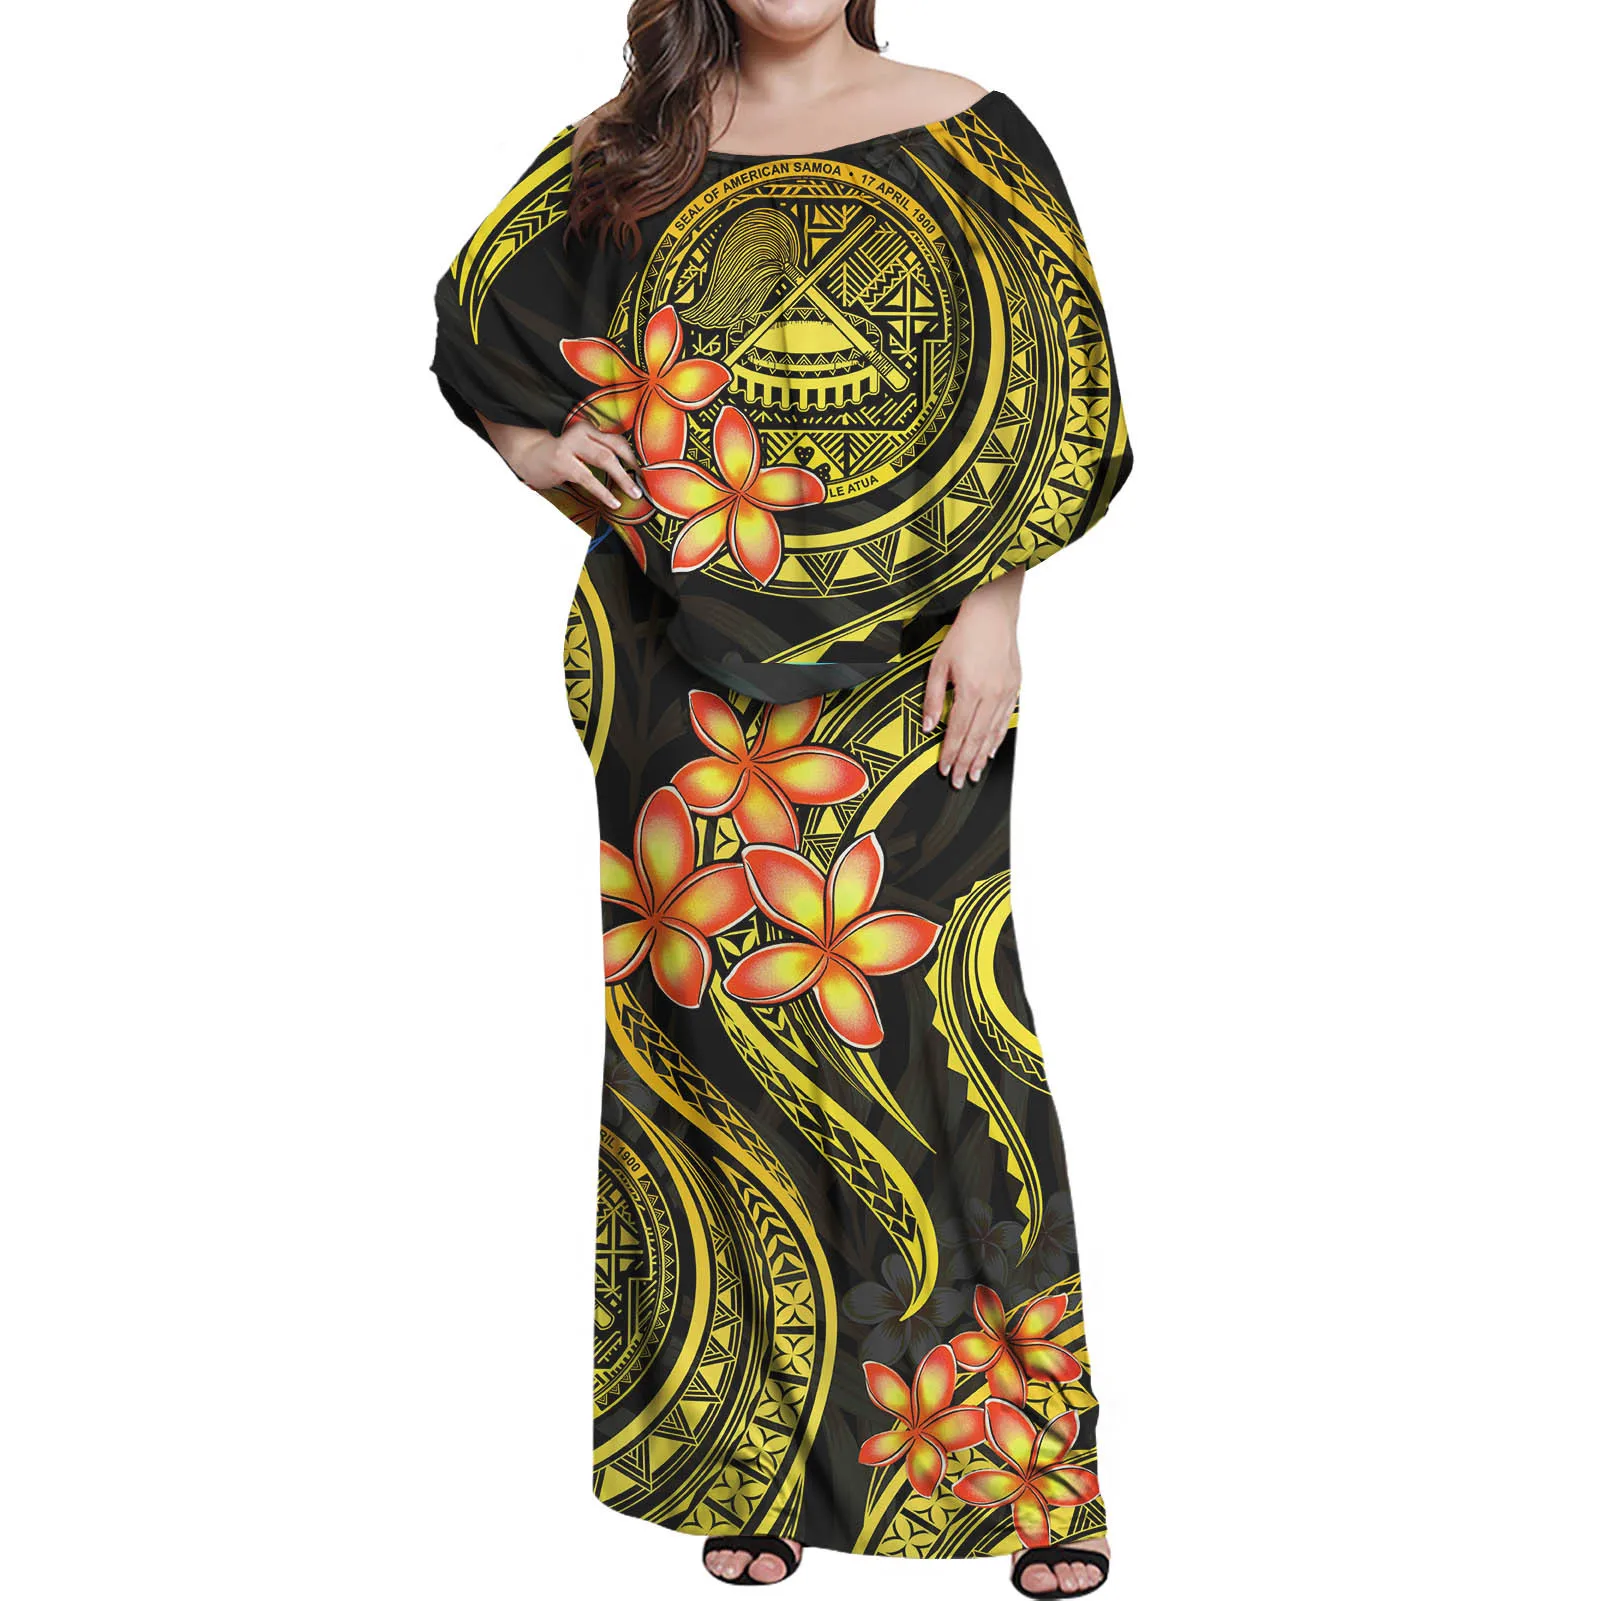 Cumagical 2022 New Arrivals Fashion Sexy Party Dresses Polynesian Tribal Hawaii Flower Print Ladies Clothes New Dresses